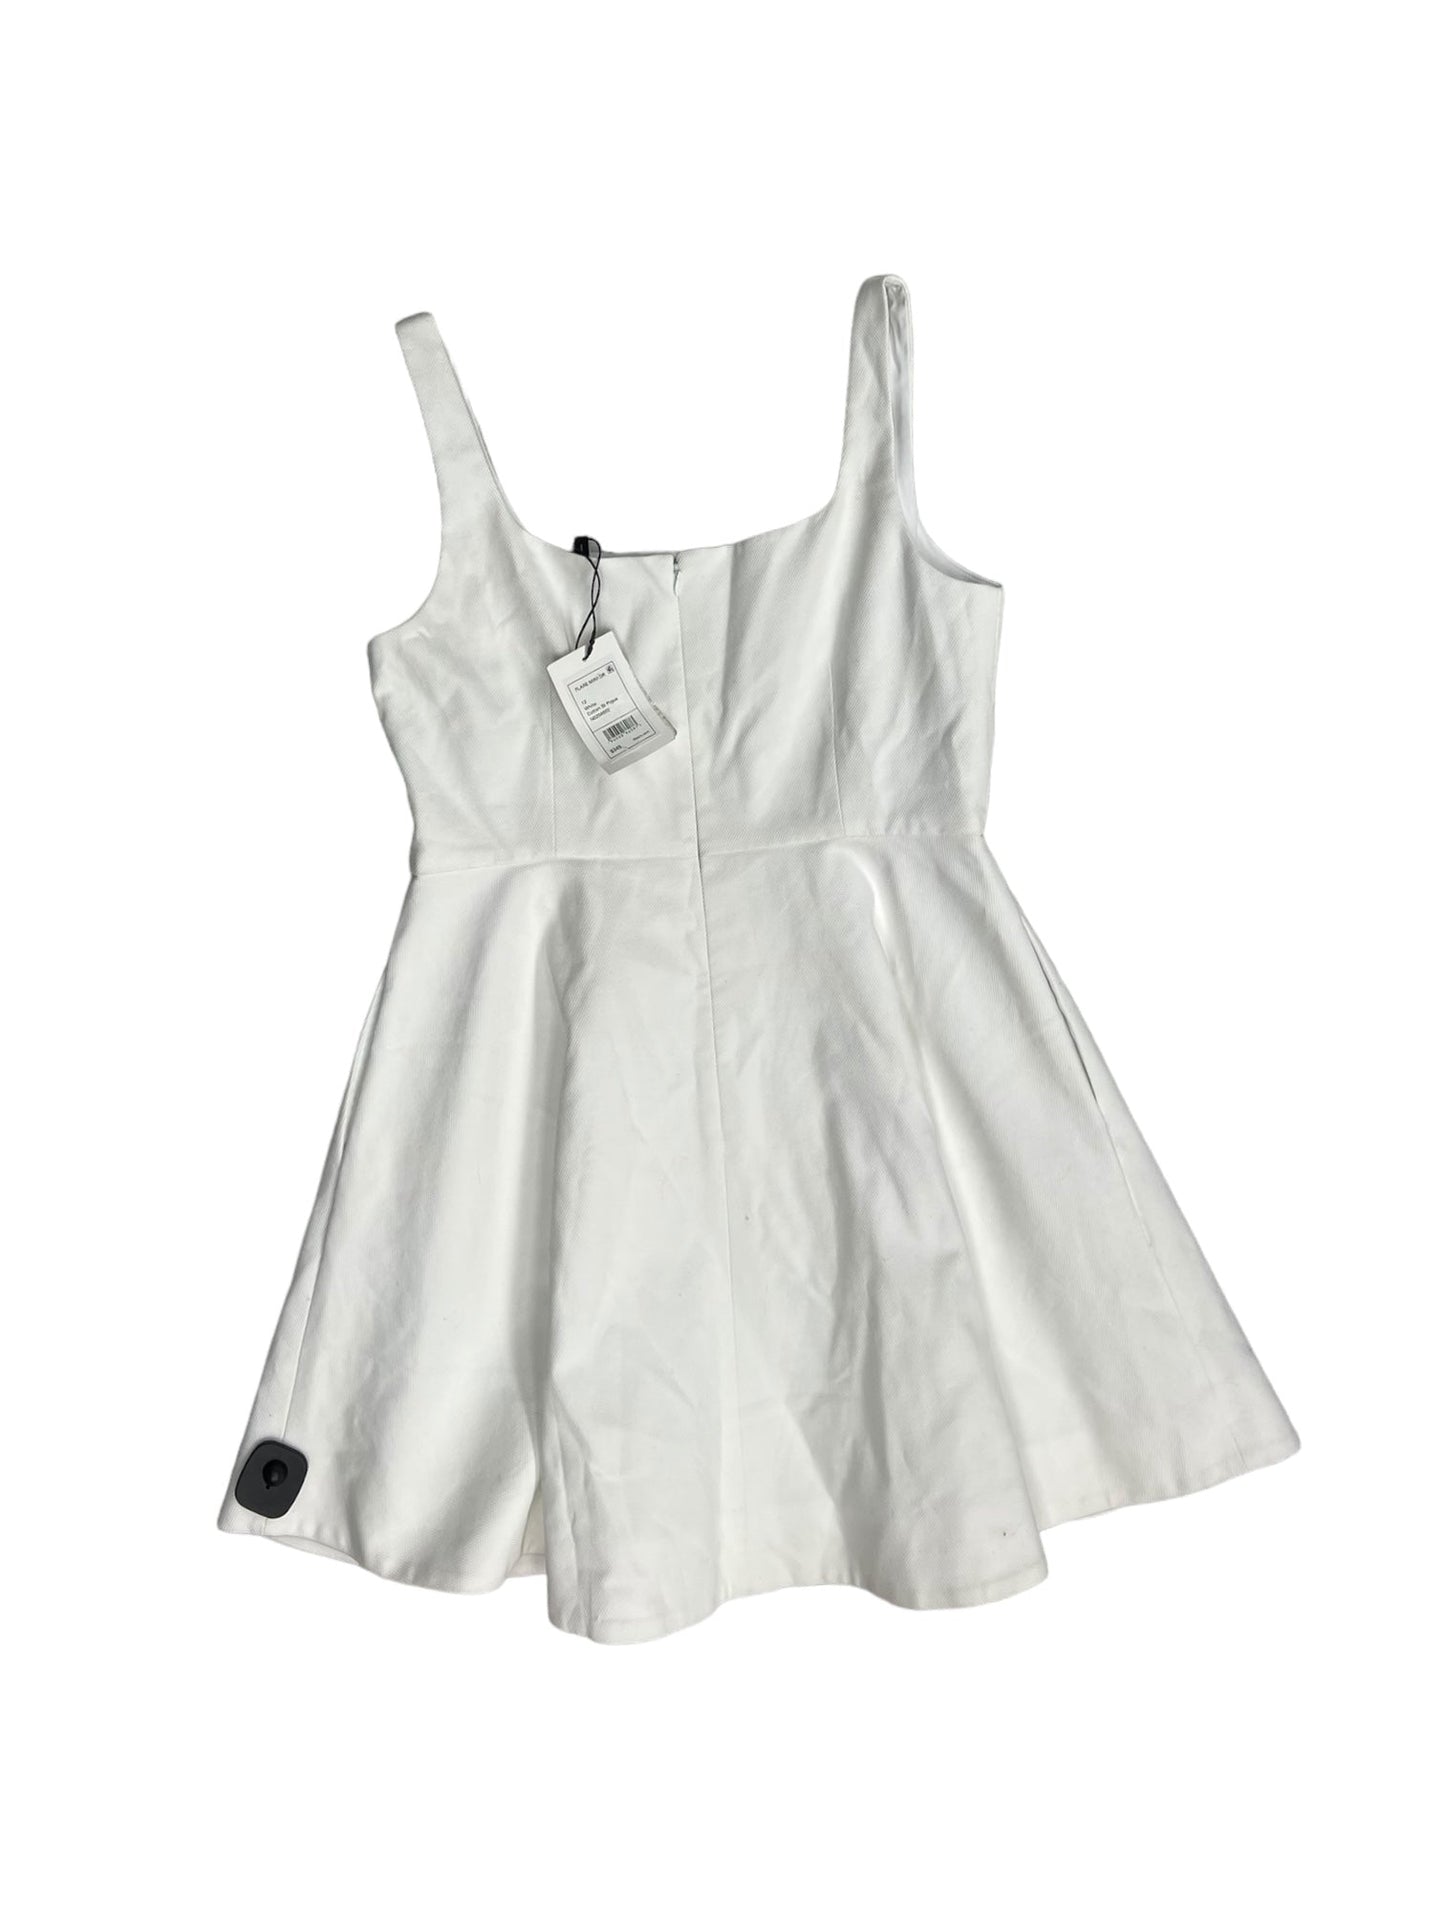 White Dress Casual Short Theory, Size 12